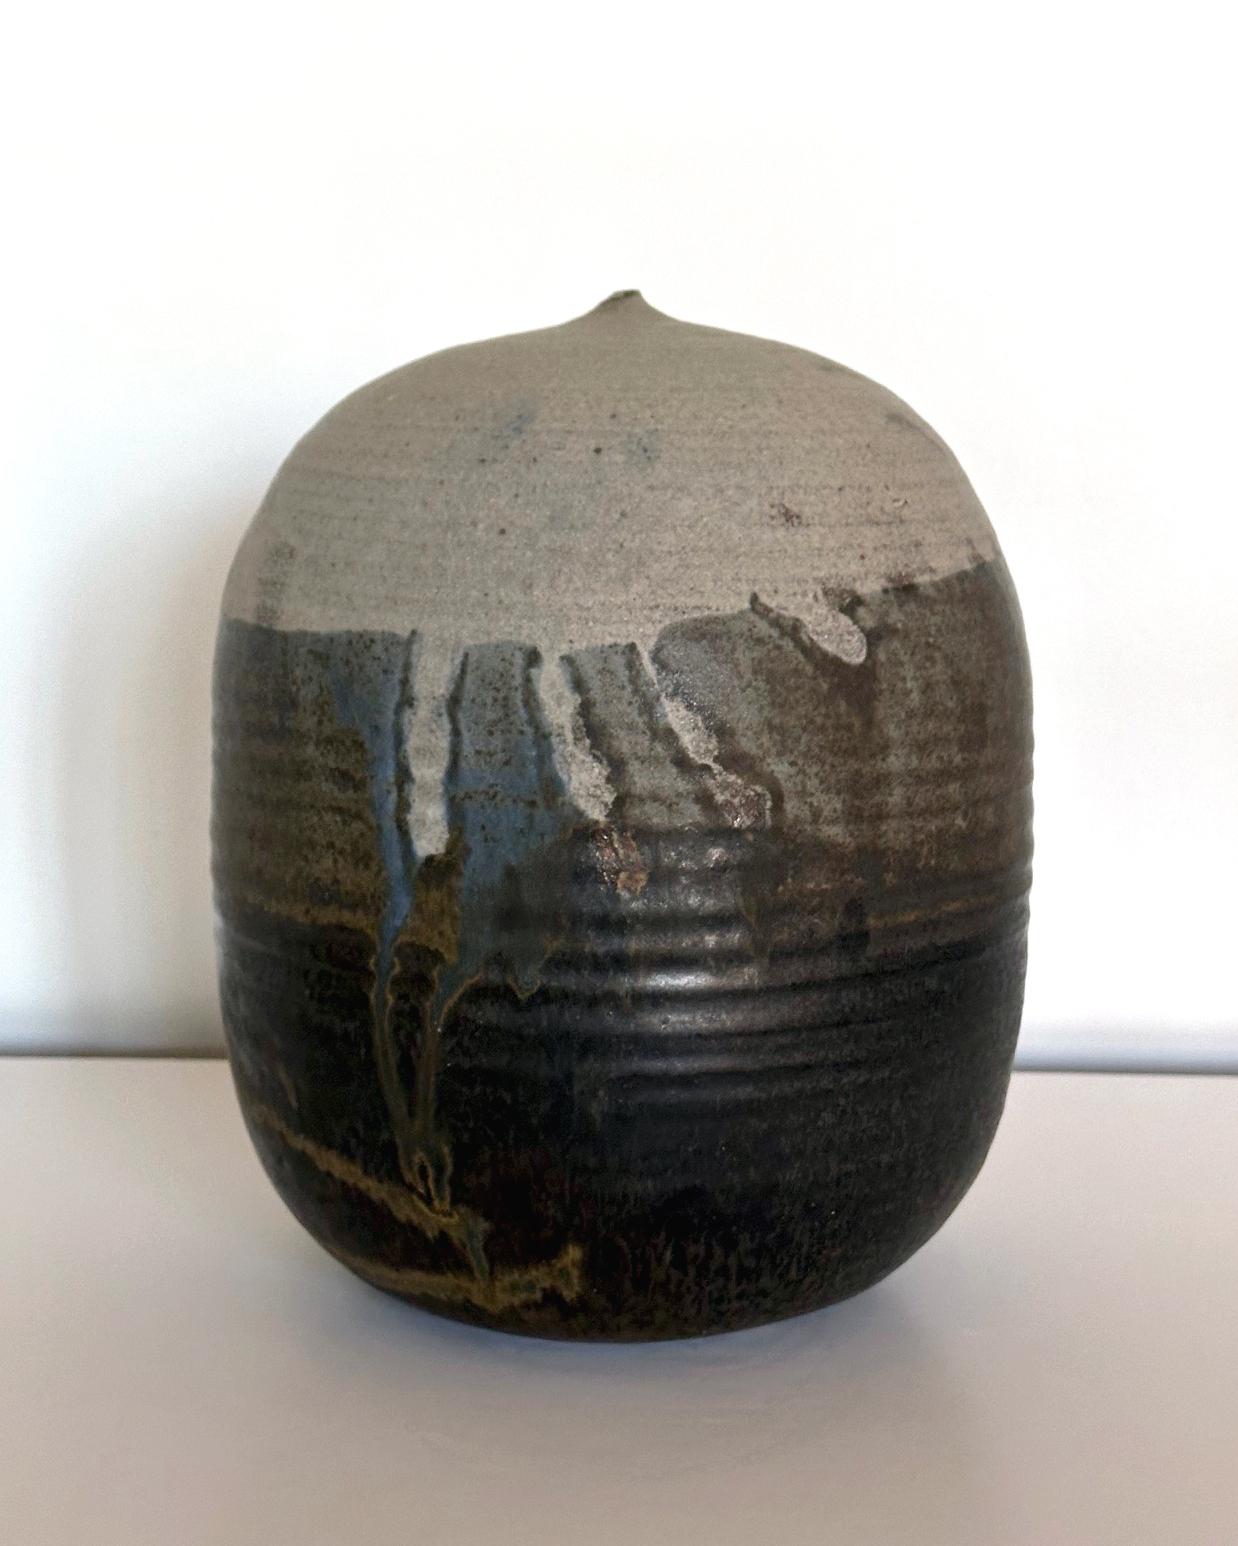 An important ceramic closed-form pot with rattle by Japanese American artist Toshiko Takaezu (American, 1922 - 2011).
The story: In the 1980s, potter Lola Rae invited Toshika to her ceramic studio and kiln in Ojai, CA to teach a class. Lola Rae had